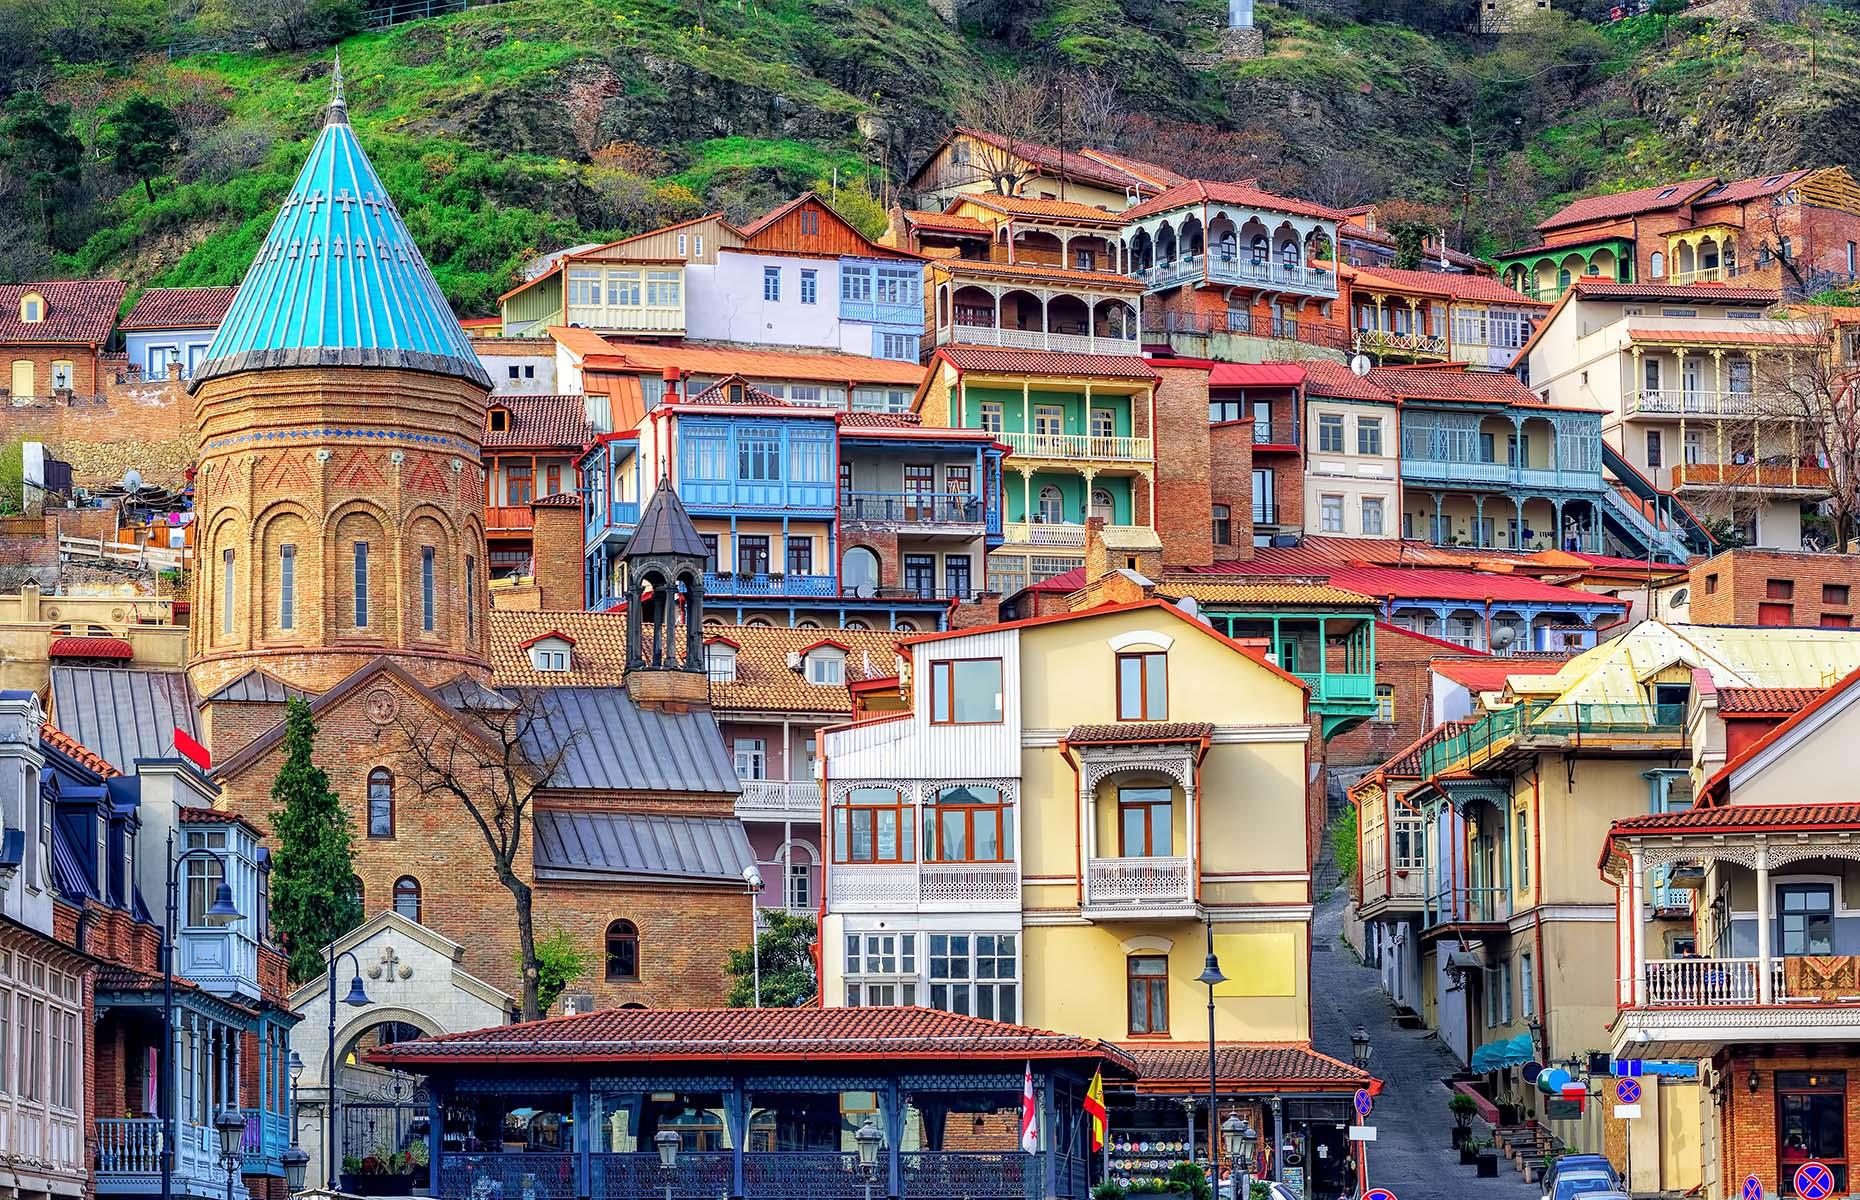 <p>It might not have entirely escaped the eye of tourists but it's fair to say the capital of this small Caucasus nation isn't one of Europe's big hitters. Those who do visit congregate in the delightful old quarter where most of Tbilisi's historical sights (including <a href="https://georgiantravelguide.com/en/narikala-fortress">Narikala Fortress</a>), cafés, bars, museums and charming streets are to be found. Incredible food and wines are another huge reason to seek out this city. Those looking to relax should check out the city's traditional hot sulfur bathhouses.</p>